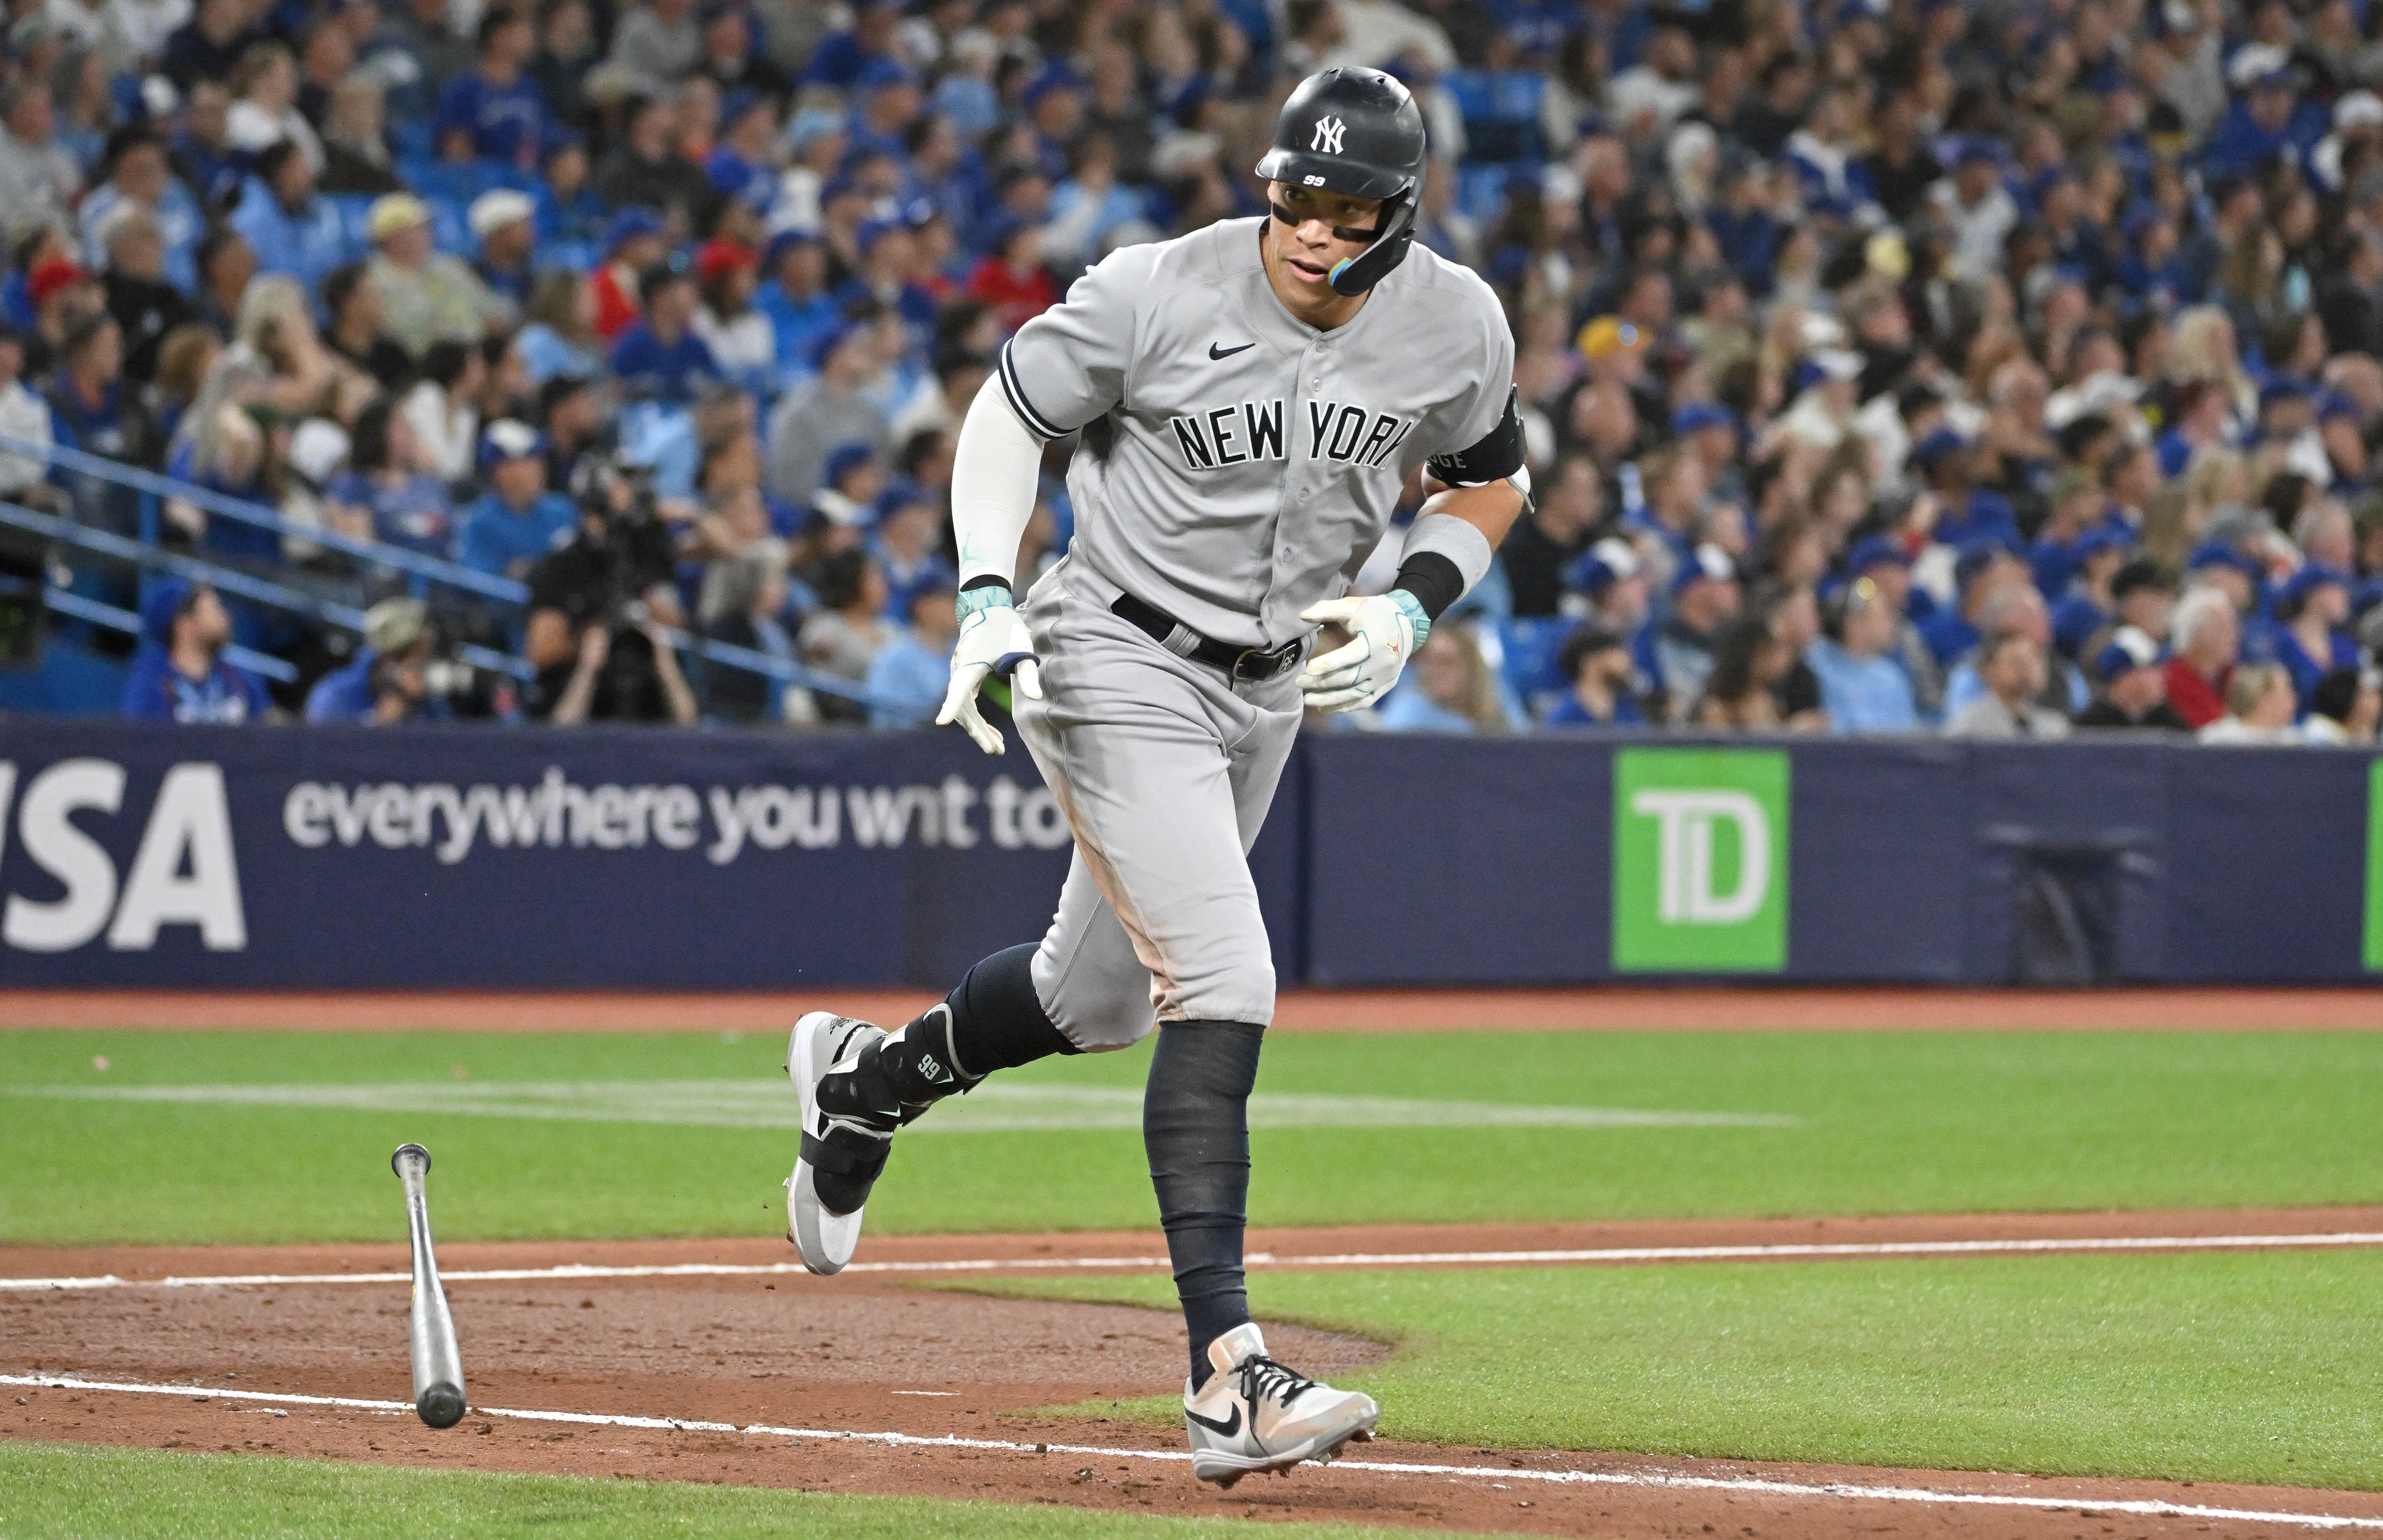 Aaron Judge runs after hitting a two-run home run against the Toronto Blue Jays.